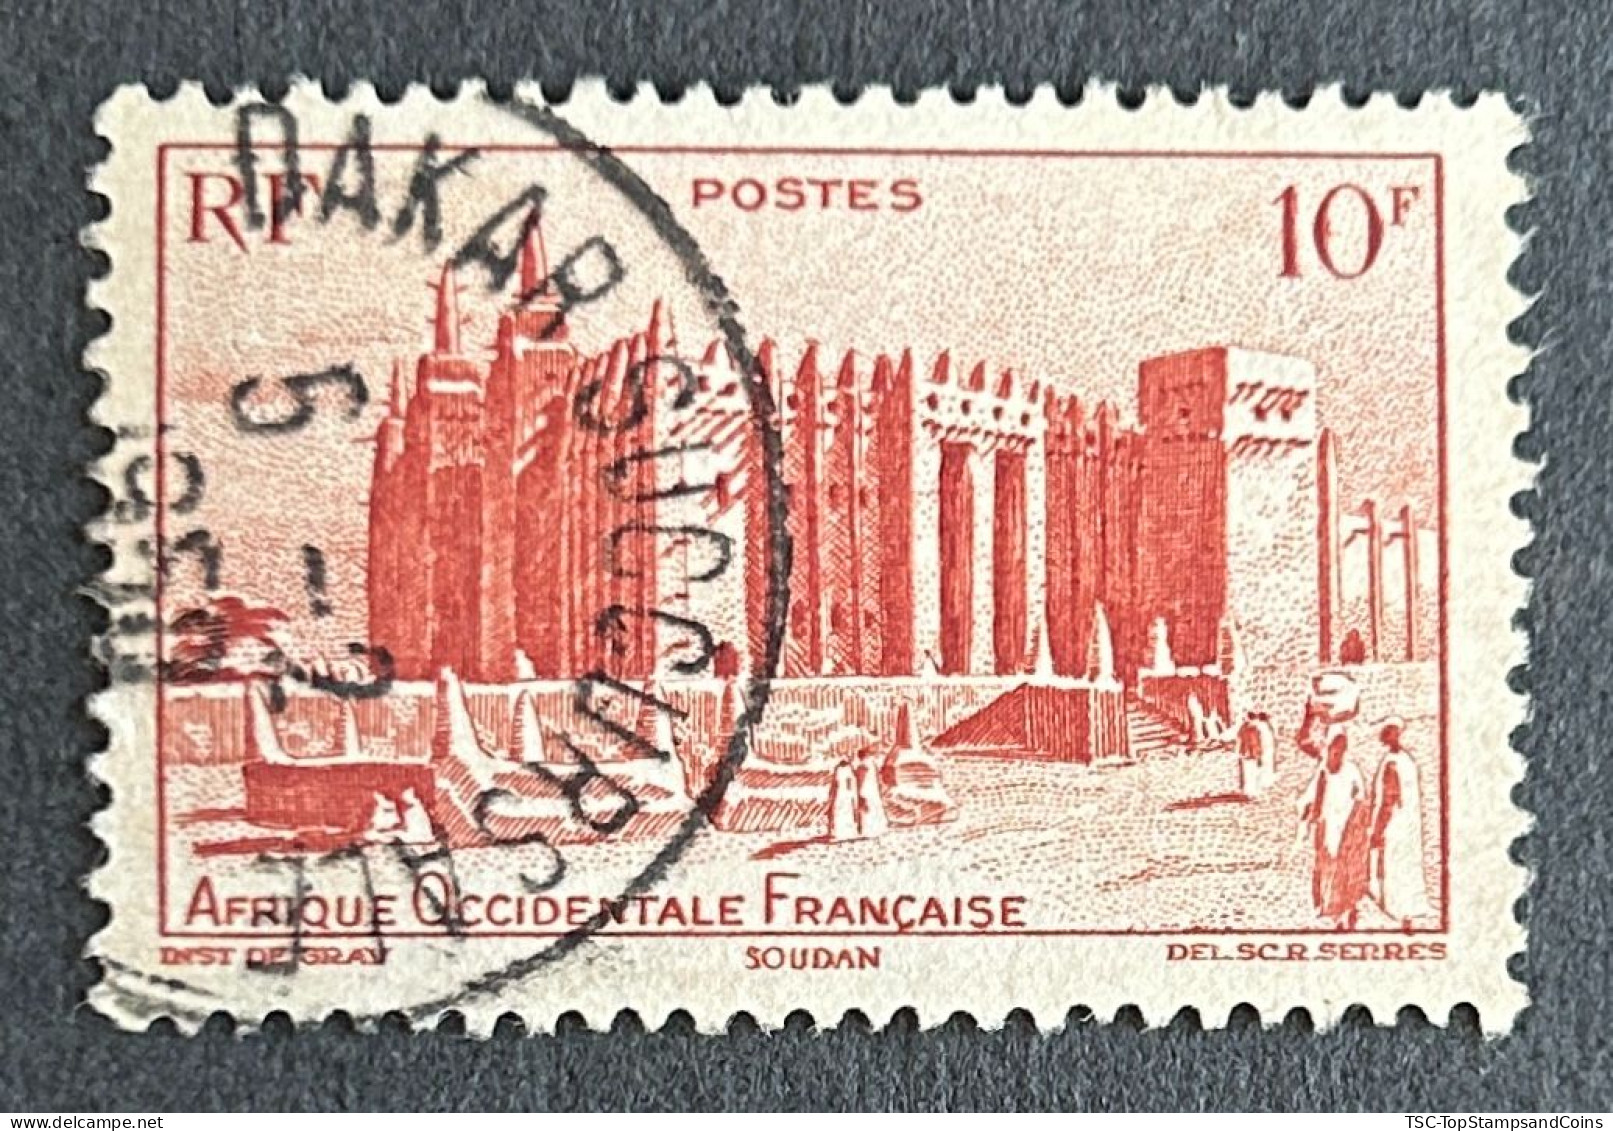 FRAWA0039U2 - Local Motives - Djenné Mosque - French Sudan - 10 F Used Stamp - AOF - 1947 - Used Stamps